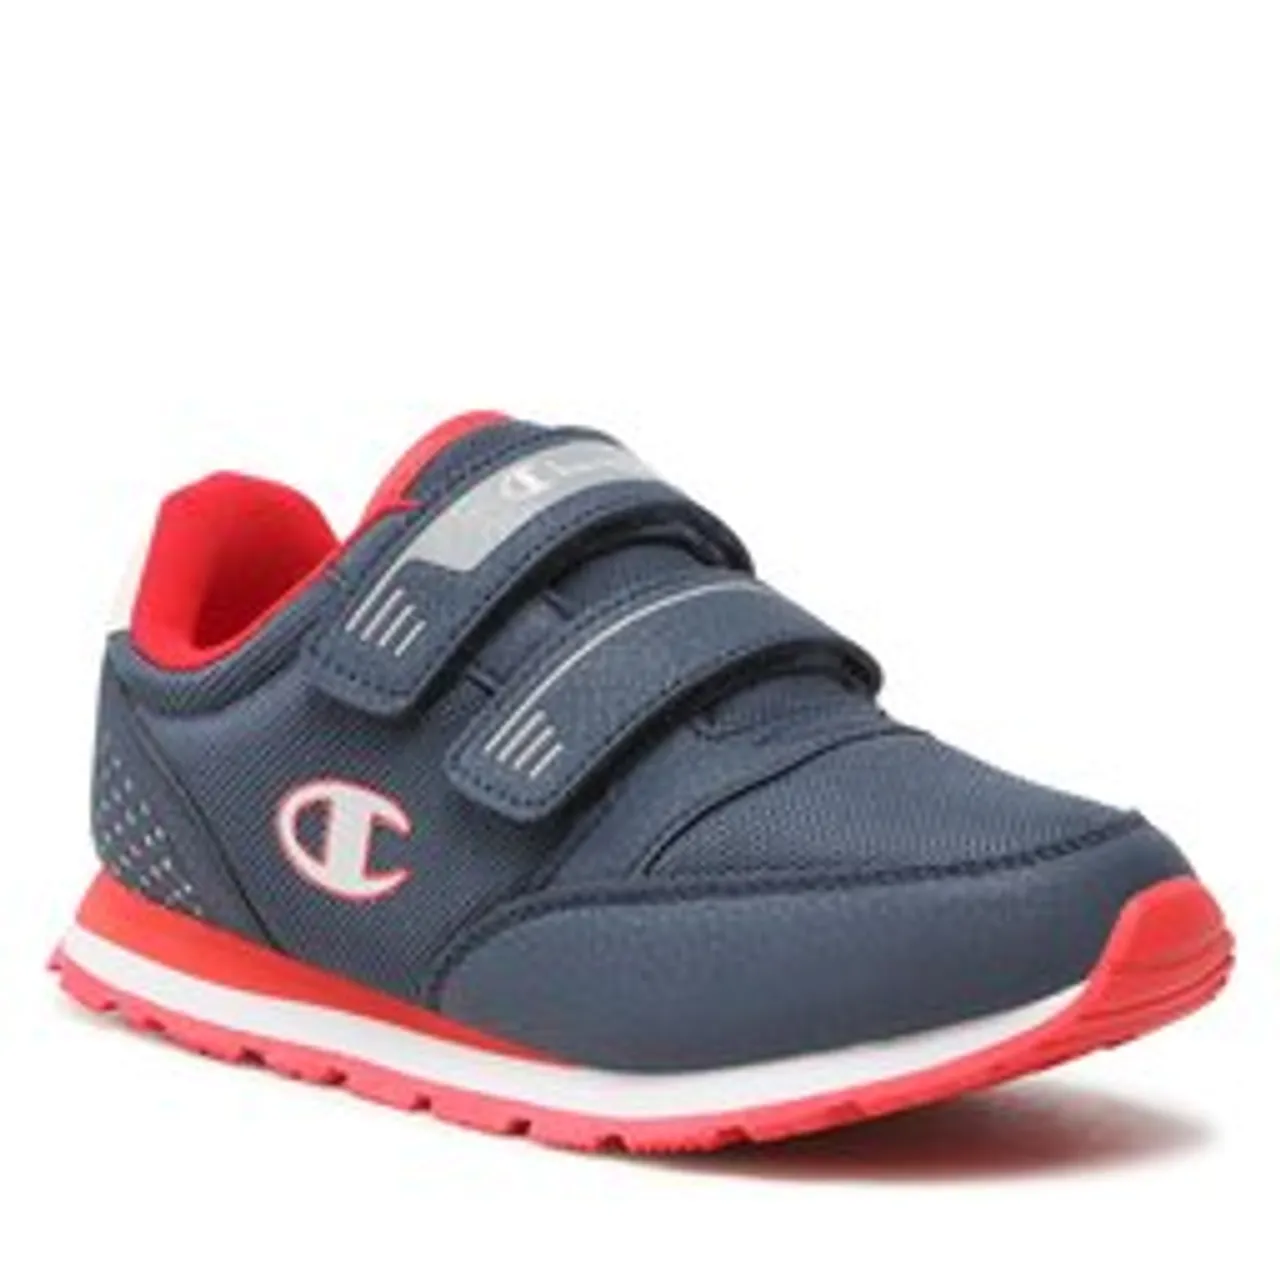 Sneakers Champion Champ Evolve M S32618-CHA-BS501 Nny/Red